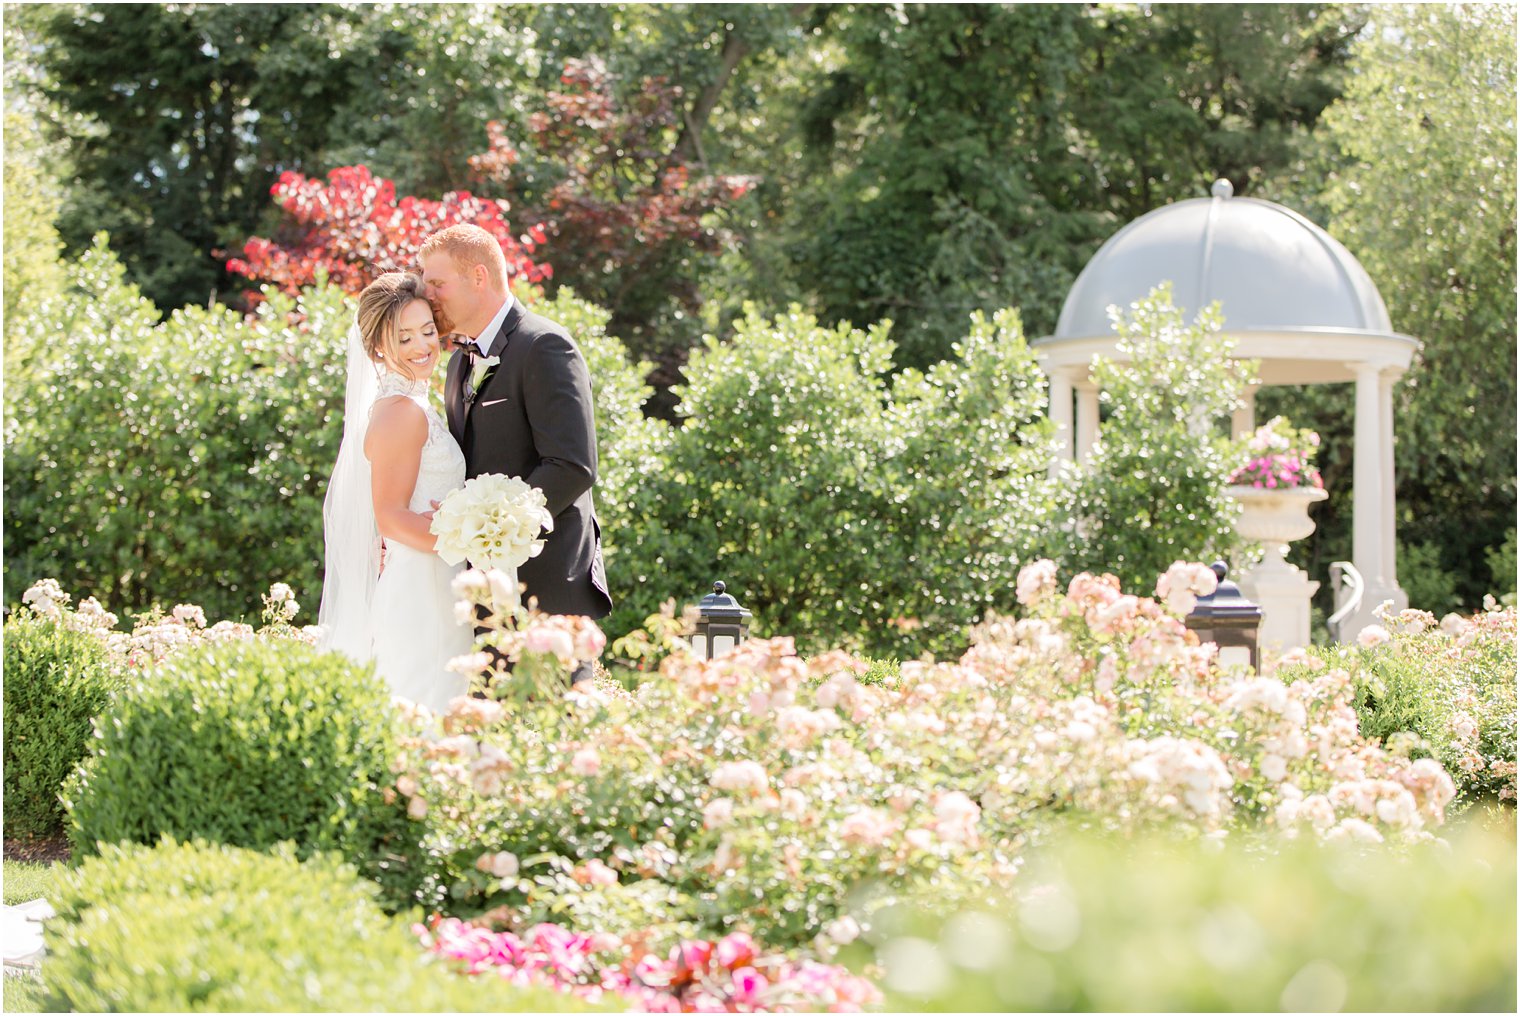 Bride and groom portraits at Park Chateau Estate and Gardens